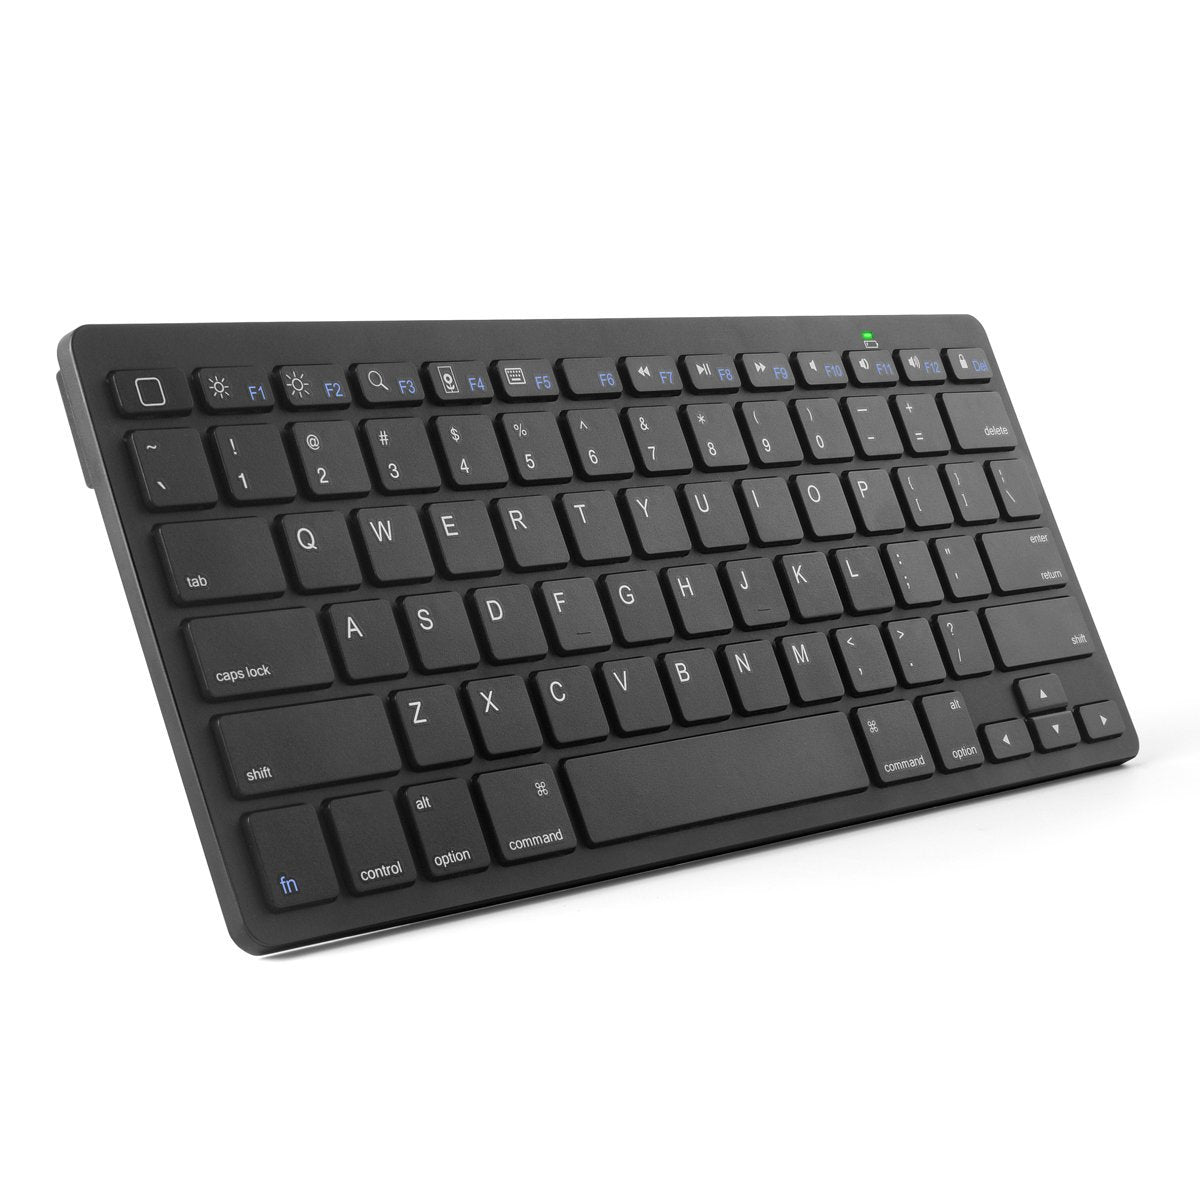 Bluetooth Keyboard Blue X5: Cross-Compatible, Lightweight, and Compact